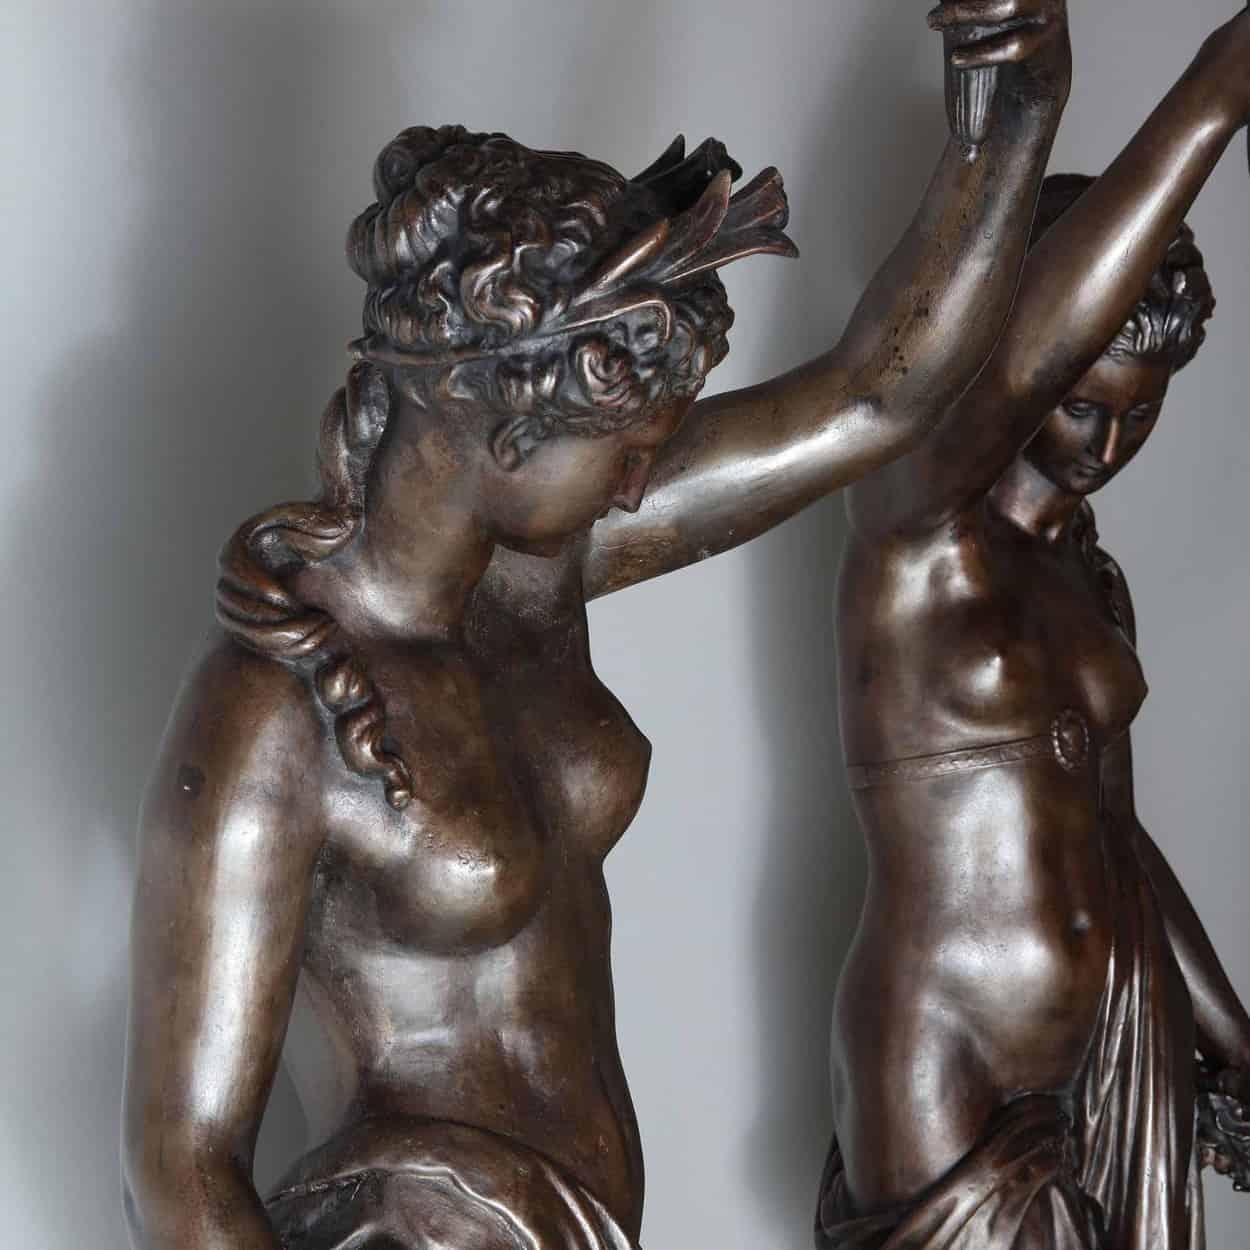 Pair of Life-Size Cast Iron Classical Female Lamp Stands by Val D'Osne In Good Condition For Sale In London, by appointment only